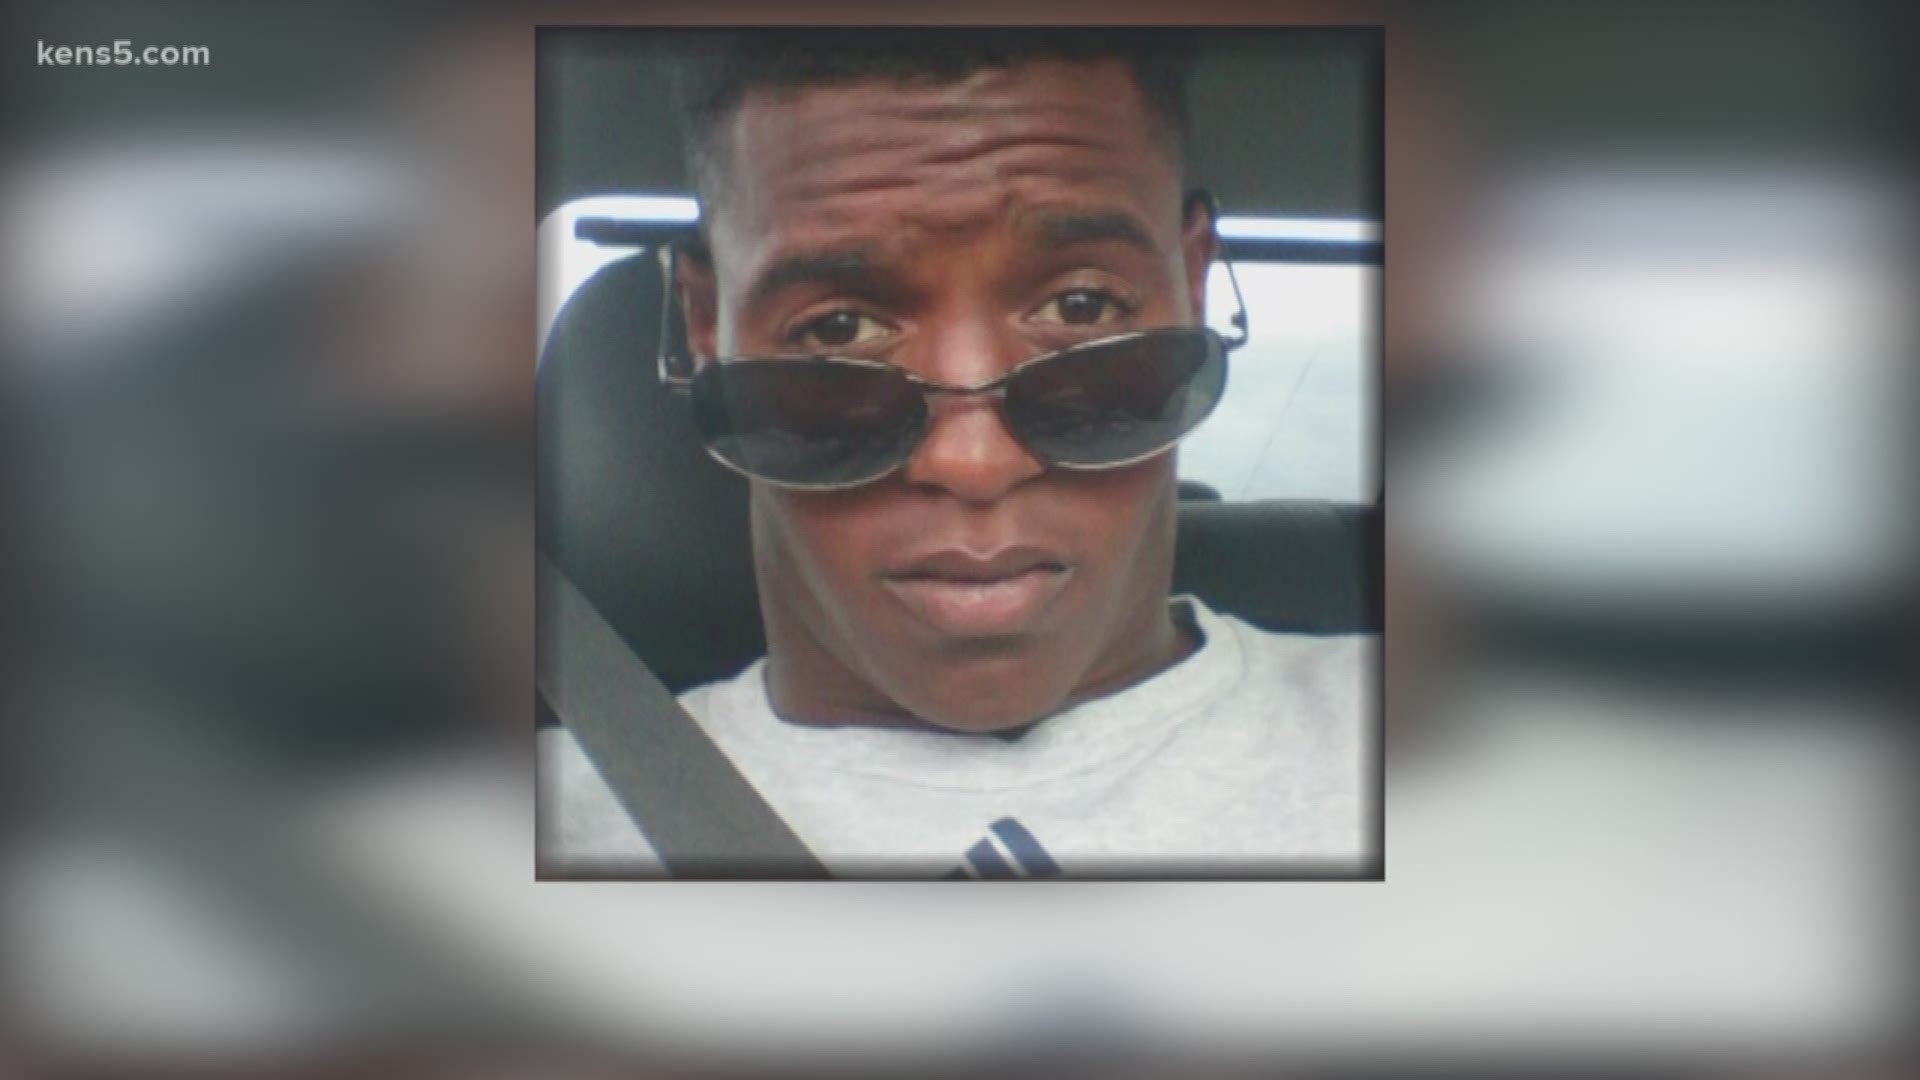 A San Antonio family is spending holiday season trying to get answers about their son's workplace death.